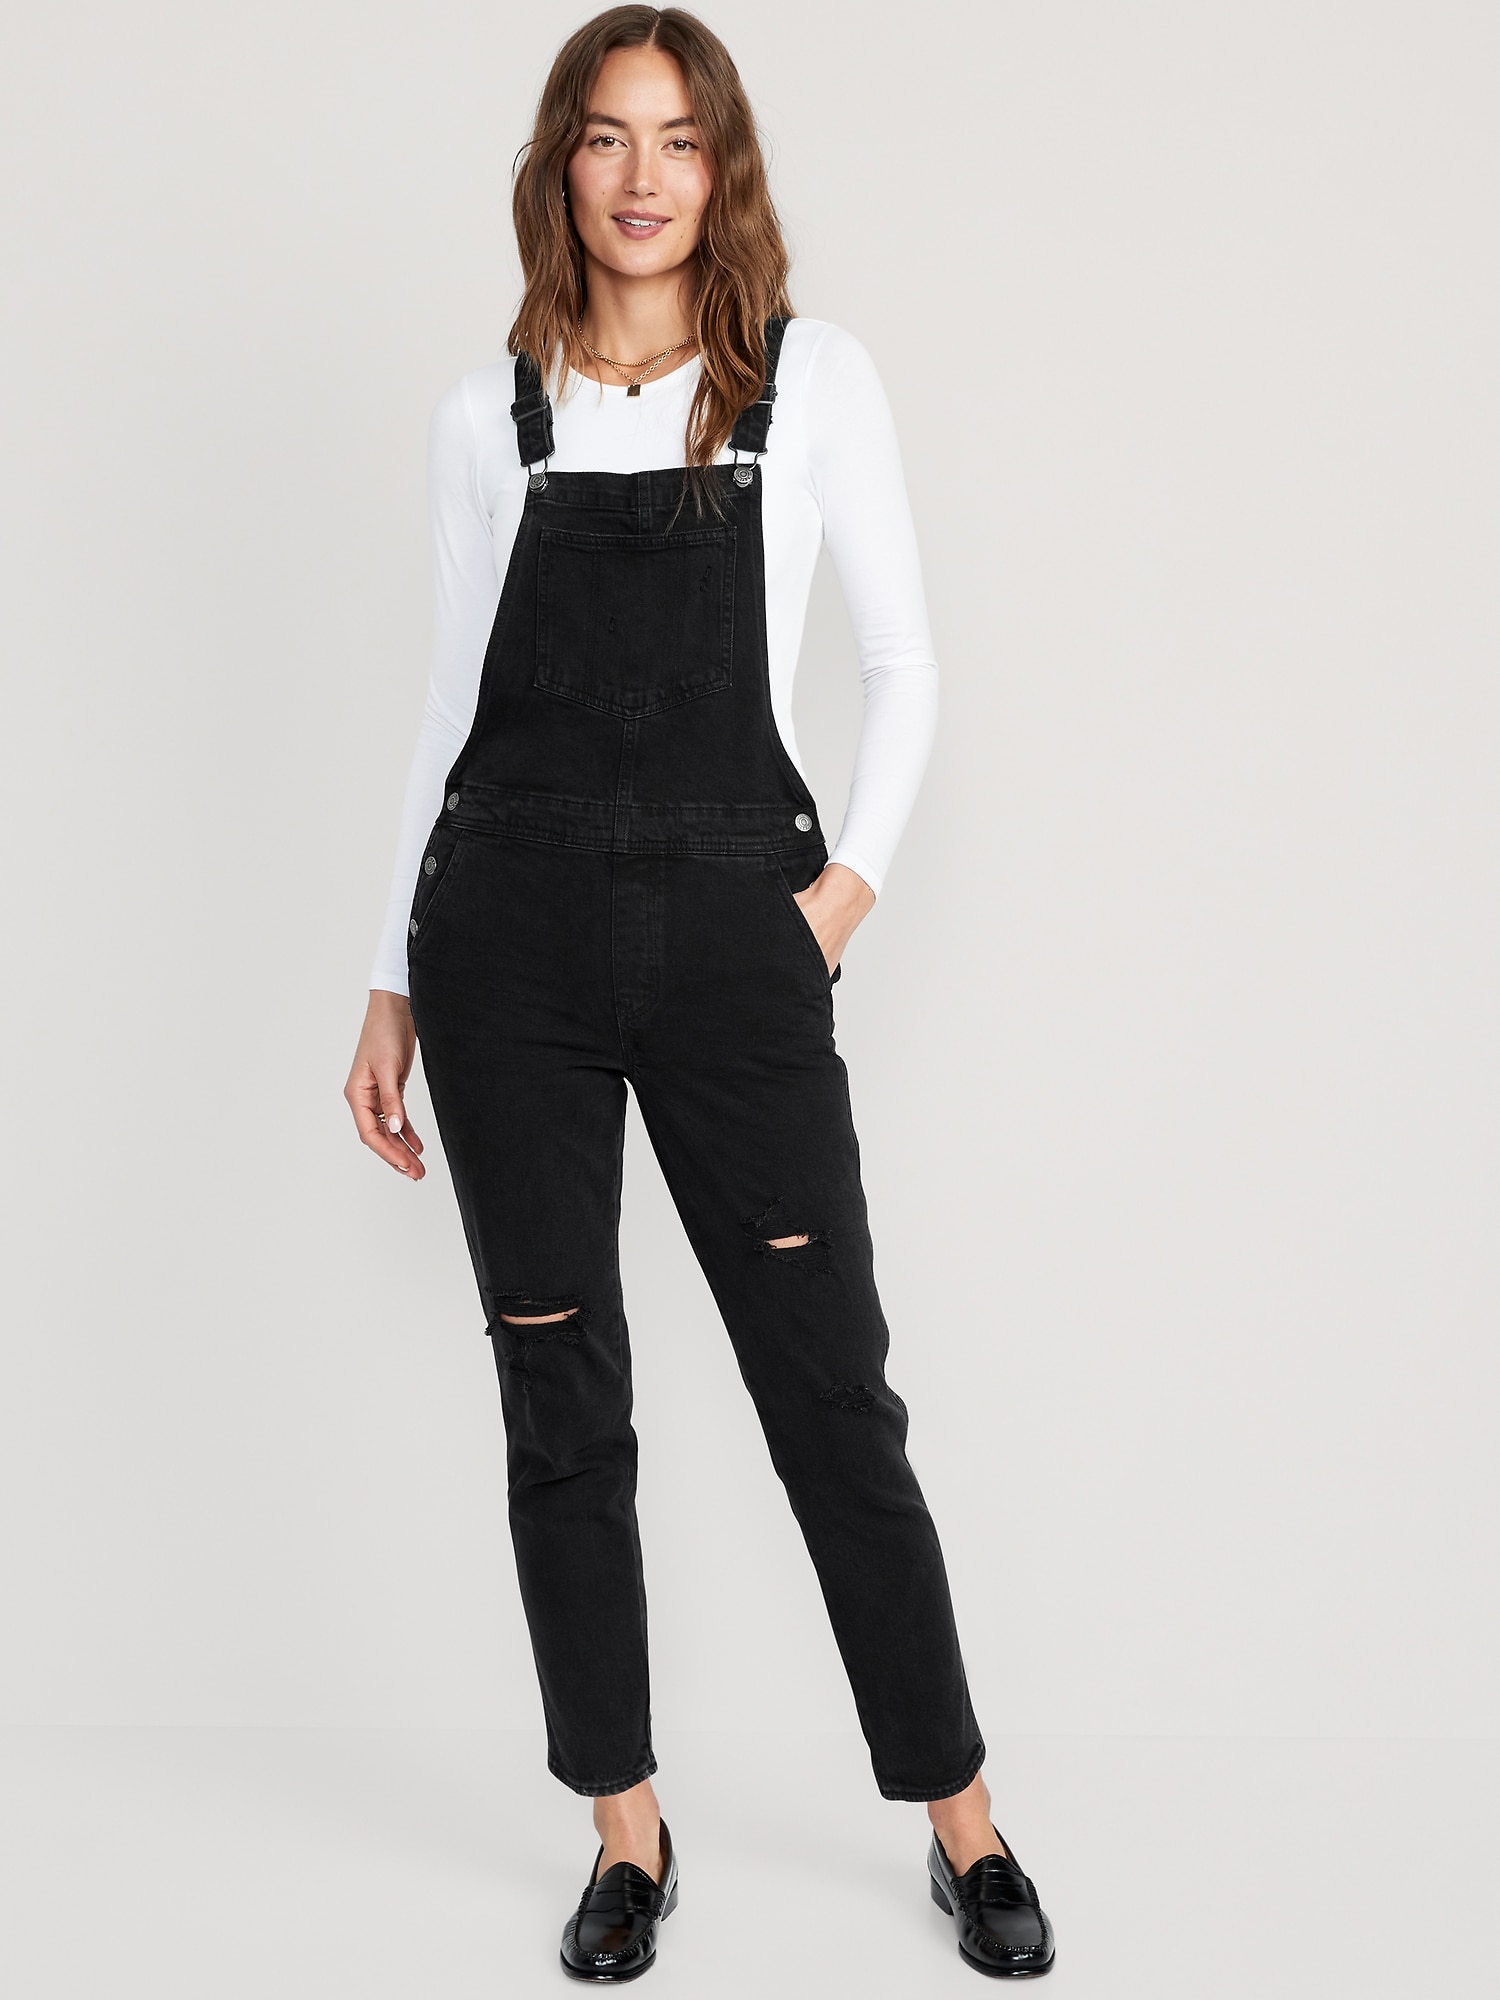 Overalls for Tall Women